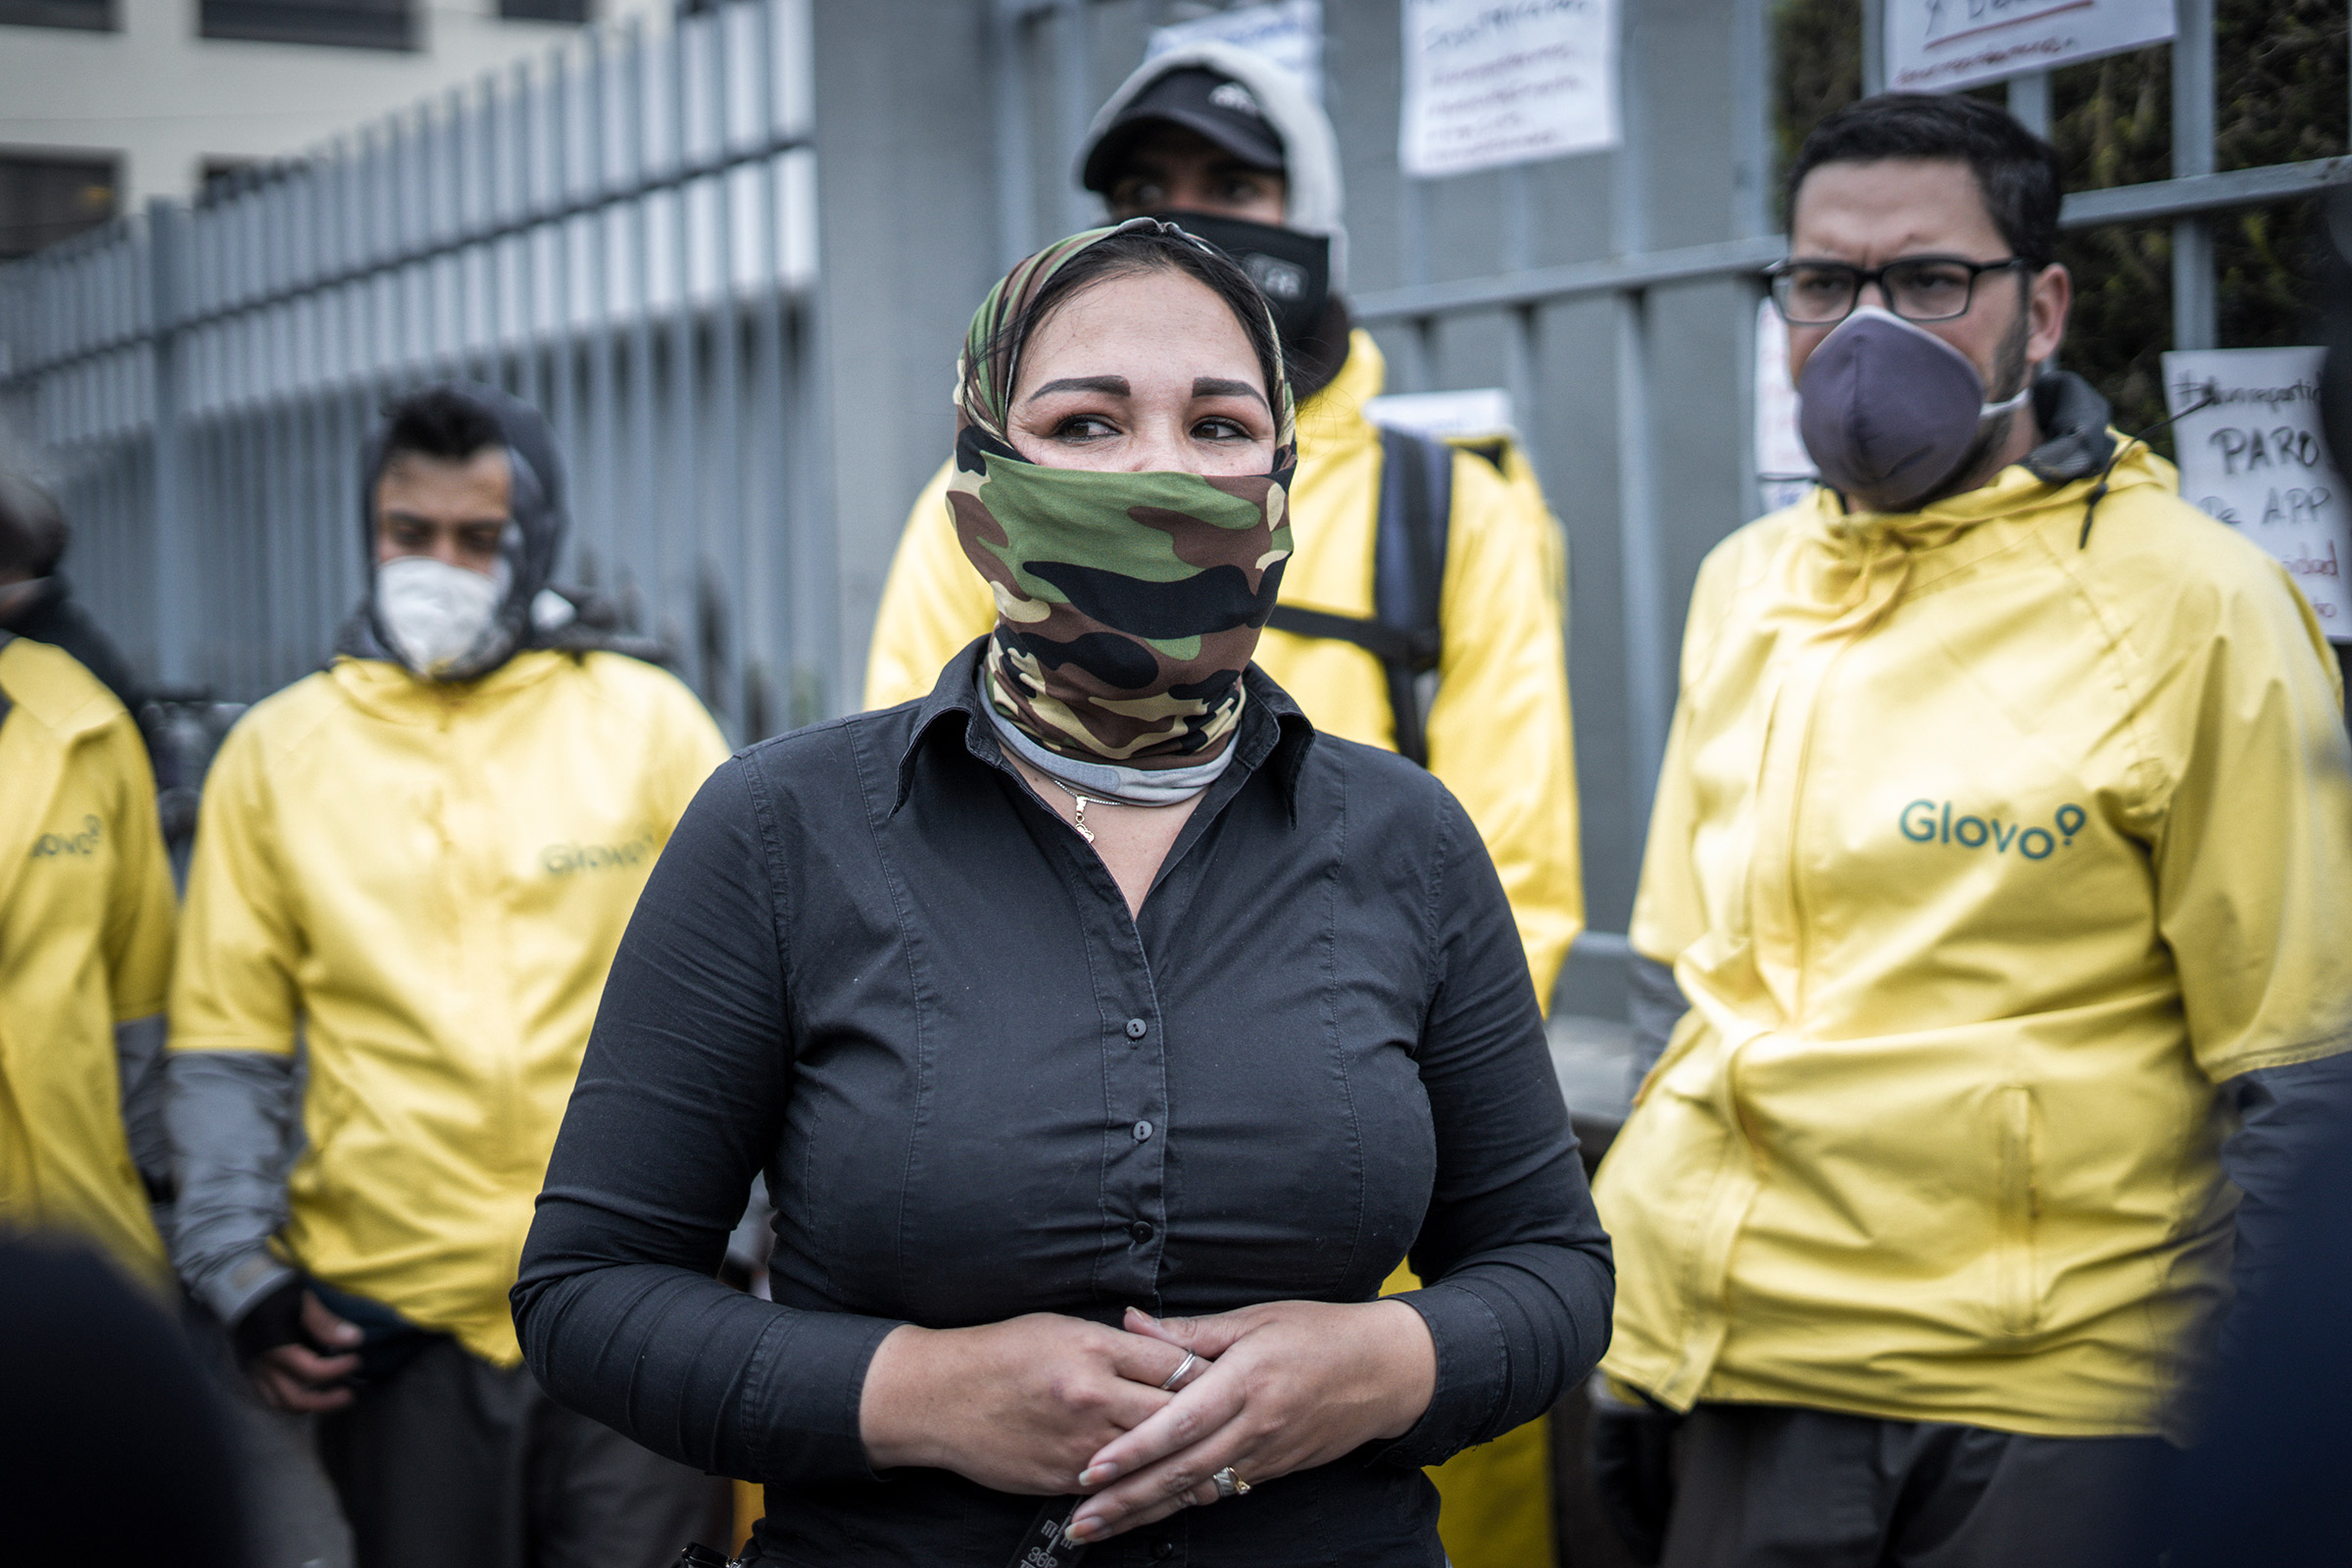 Yuly Ramírez, a mother and former lawyer from Venezuela, speaks during a global drivers protest last April in Quito, Ecuador. Ramírez has become an organizer and spokesperson demanding drivers' rights. (Isadora Romero)